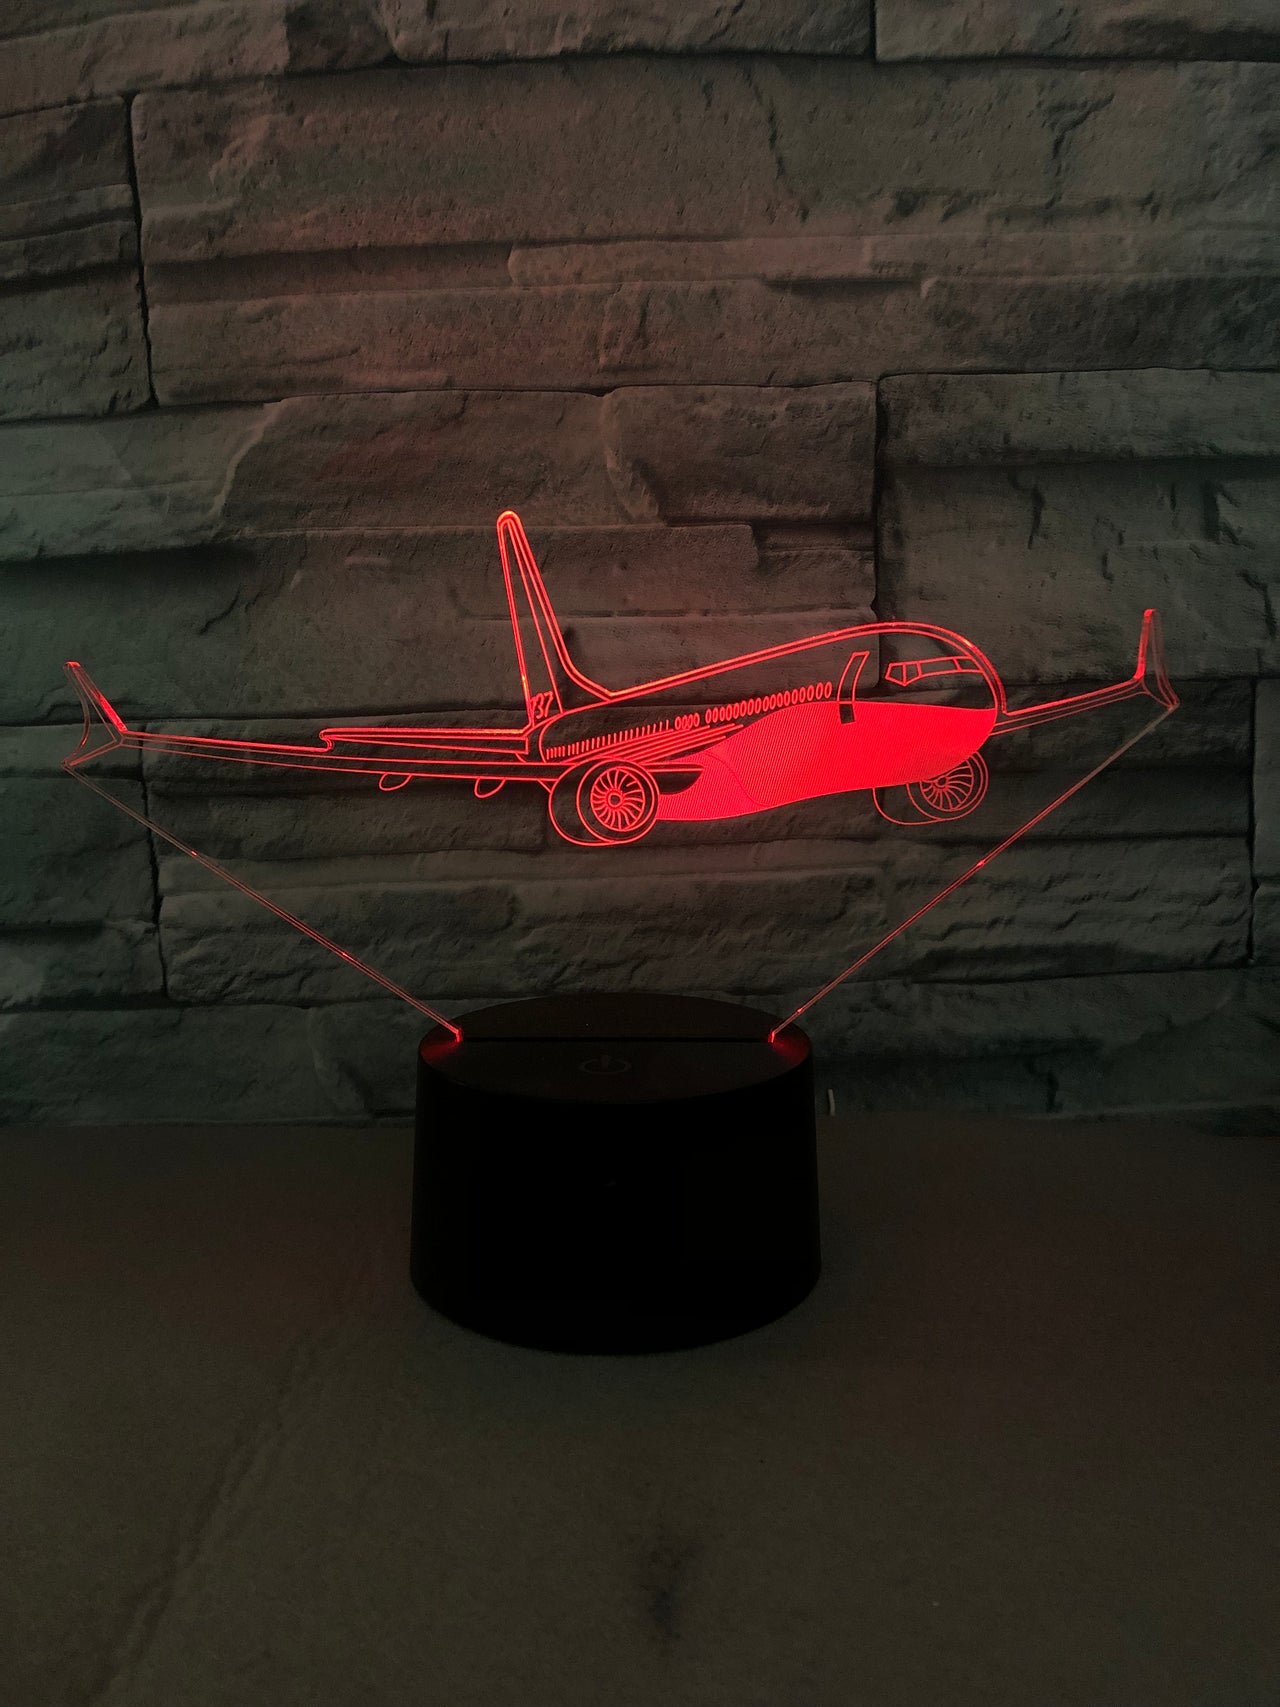 Face to Face with Amazing Boeing 737 Designed 3D Lamp